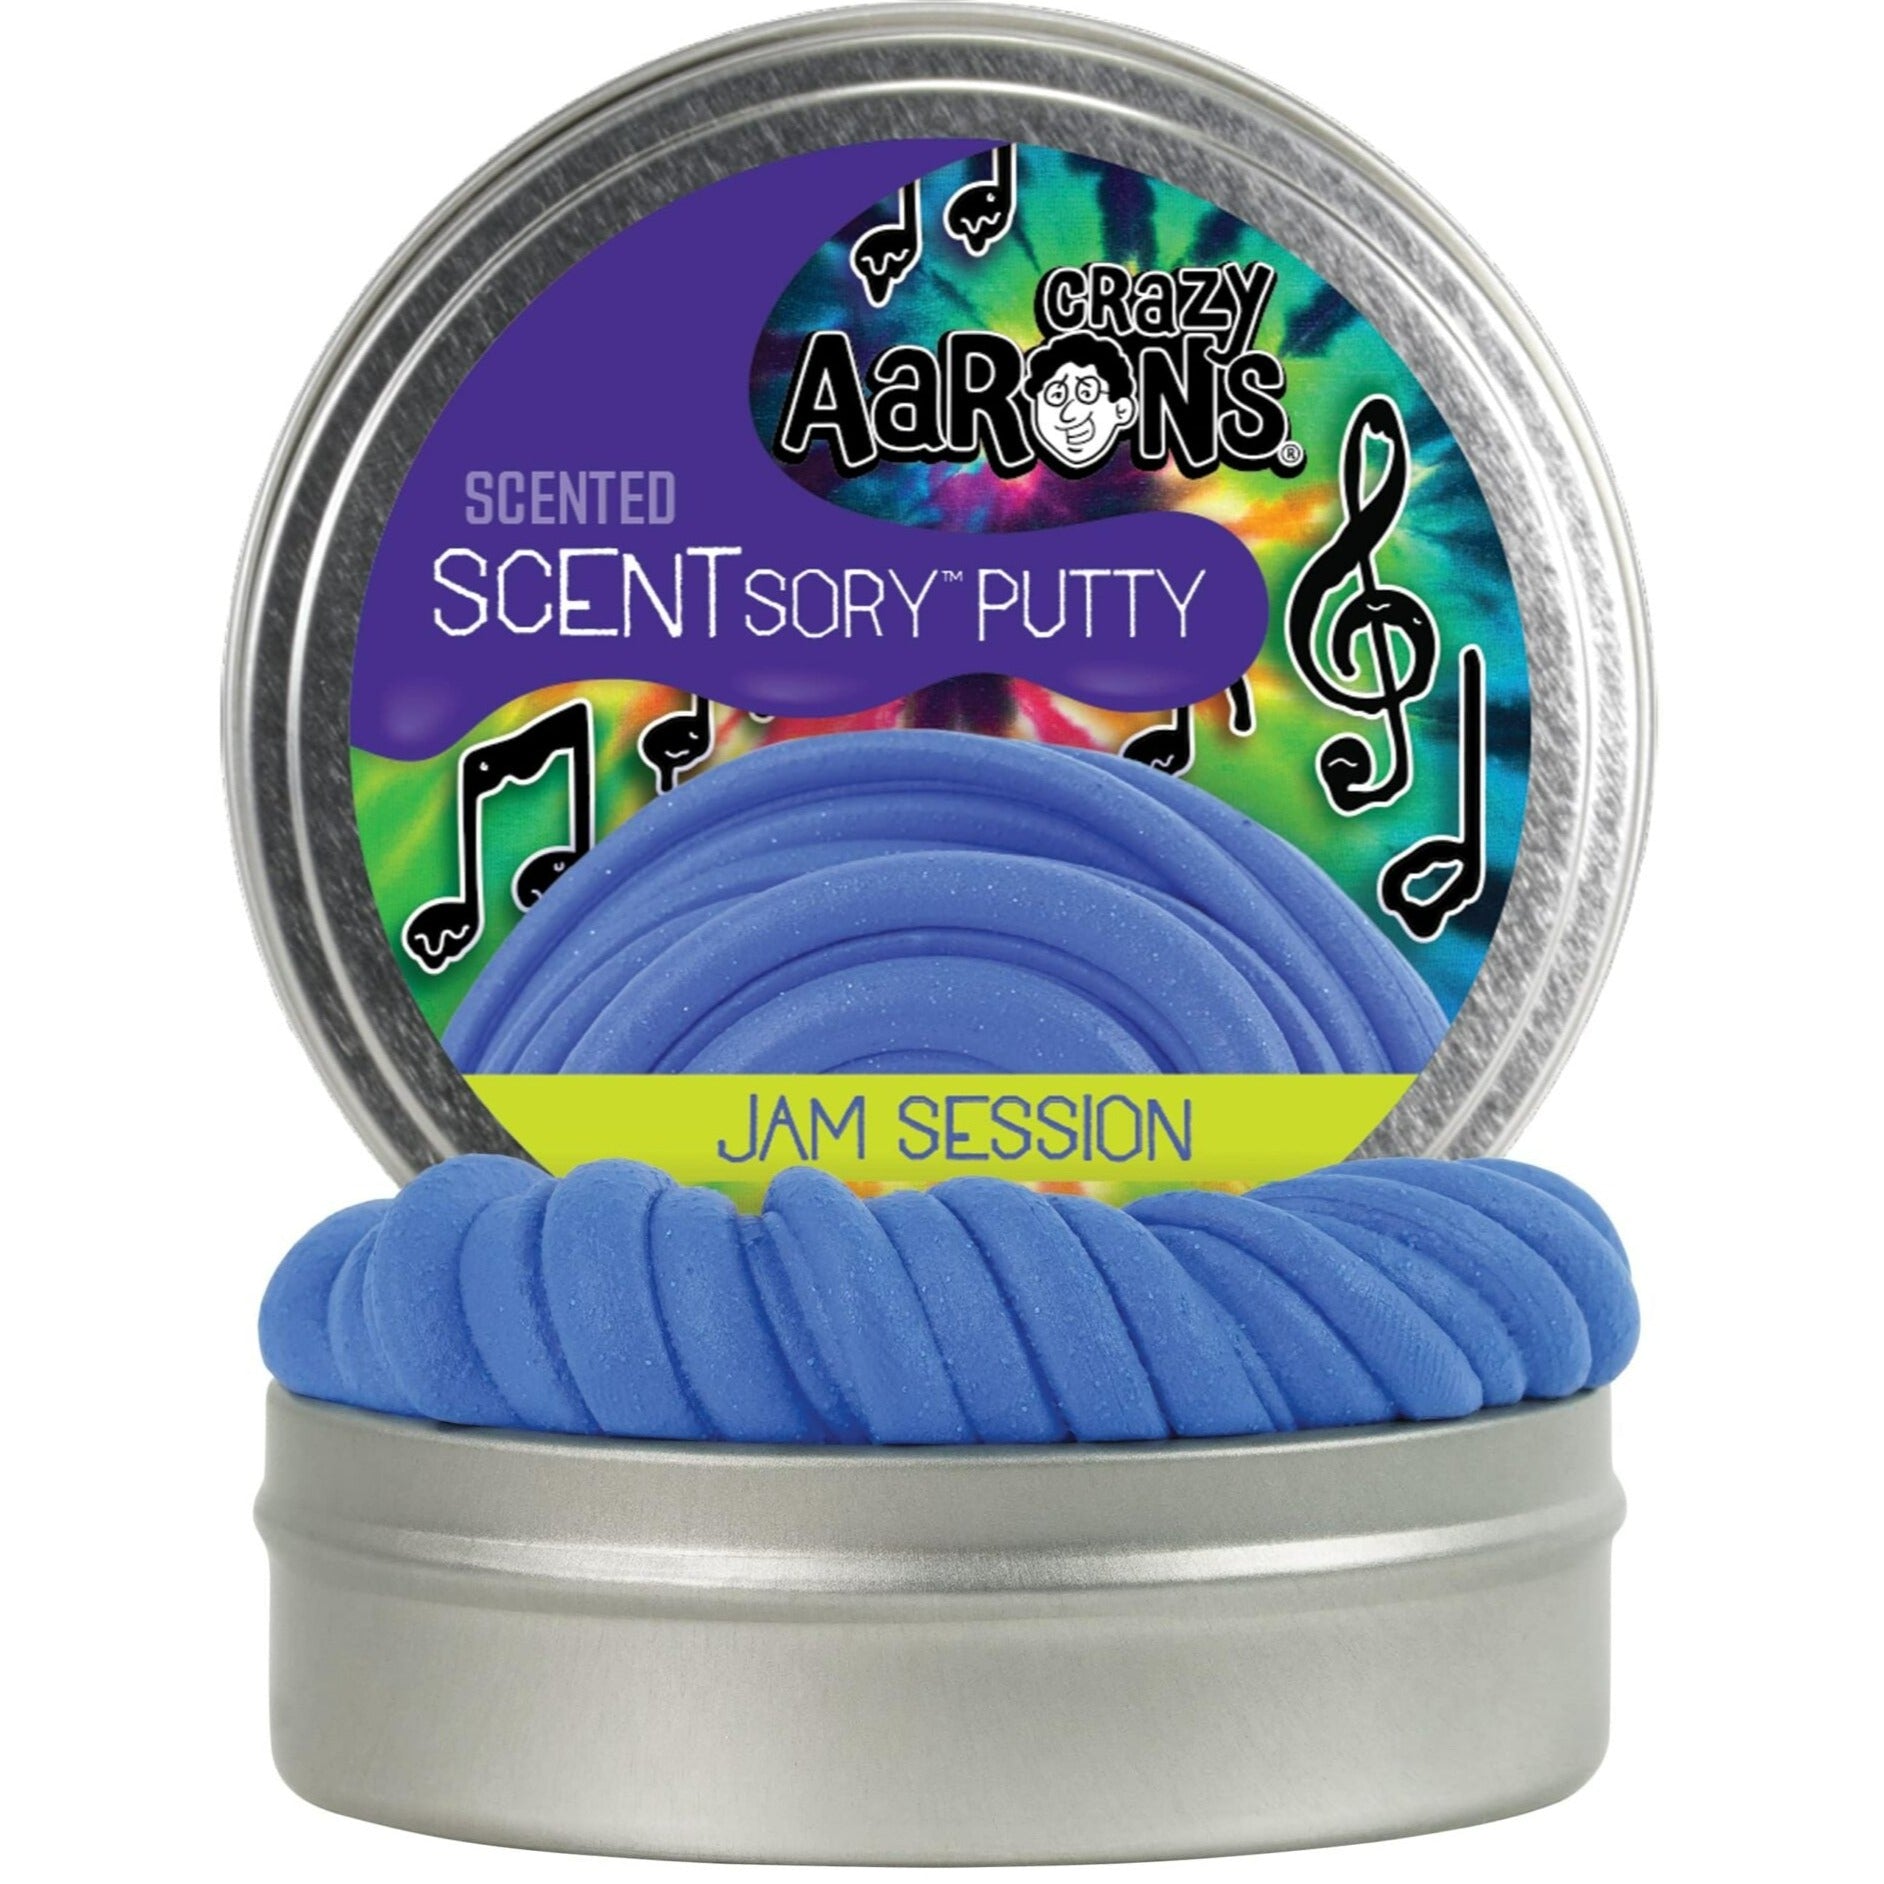 Crazy Aarons Putty SCENTsory Vibes - Jam Session Tin